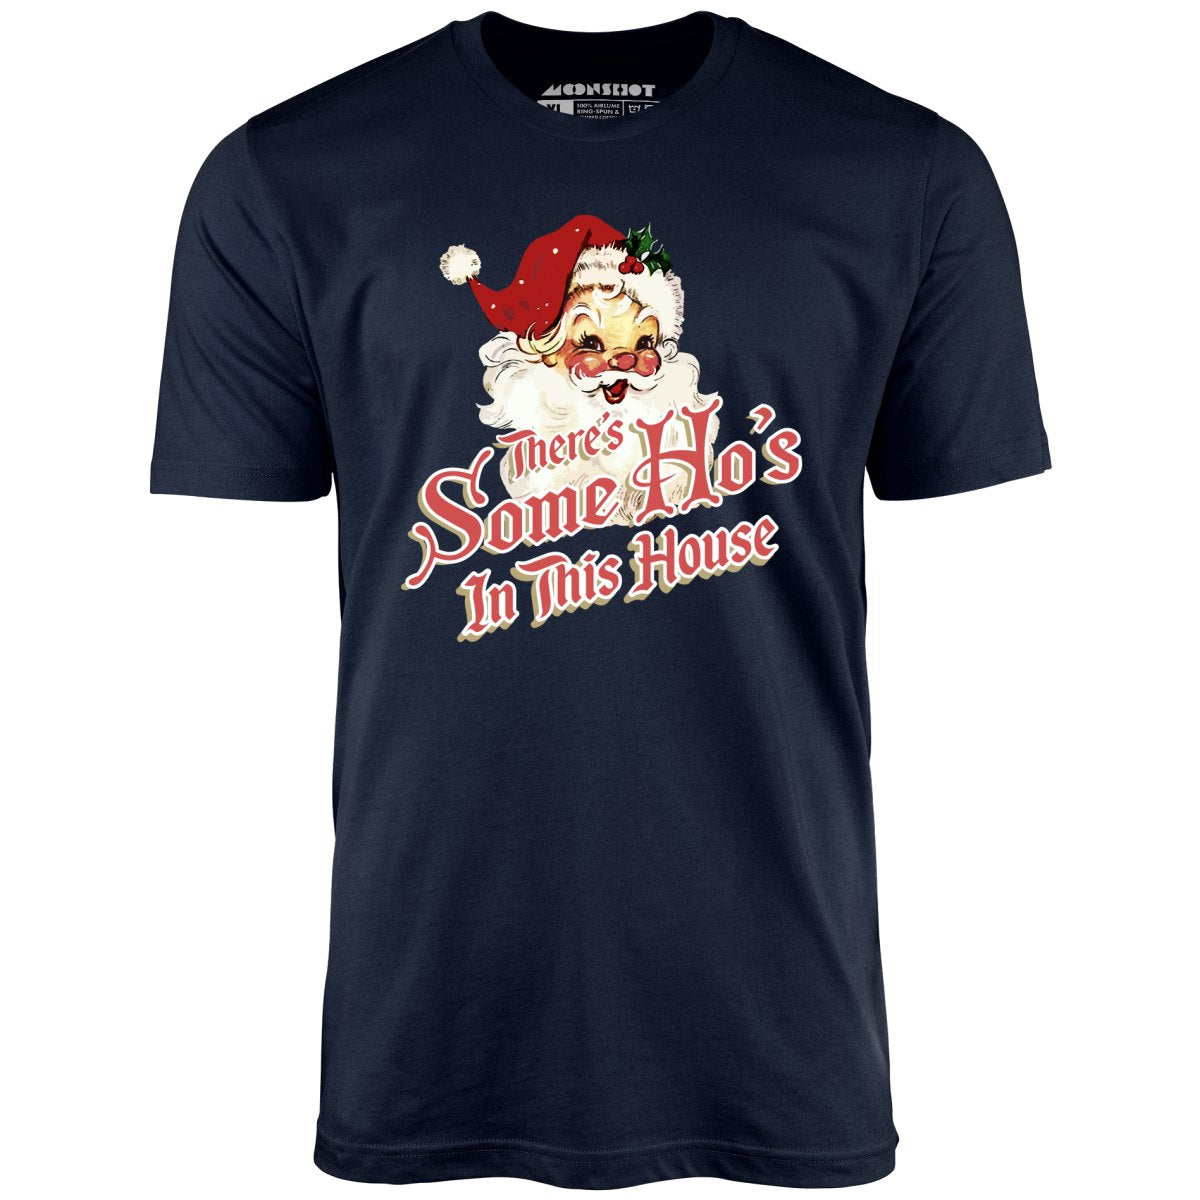 There's Some Ho's in this House - Unisex T-Shirt